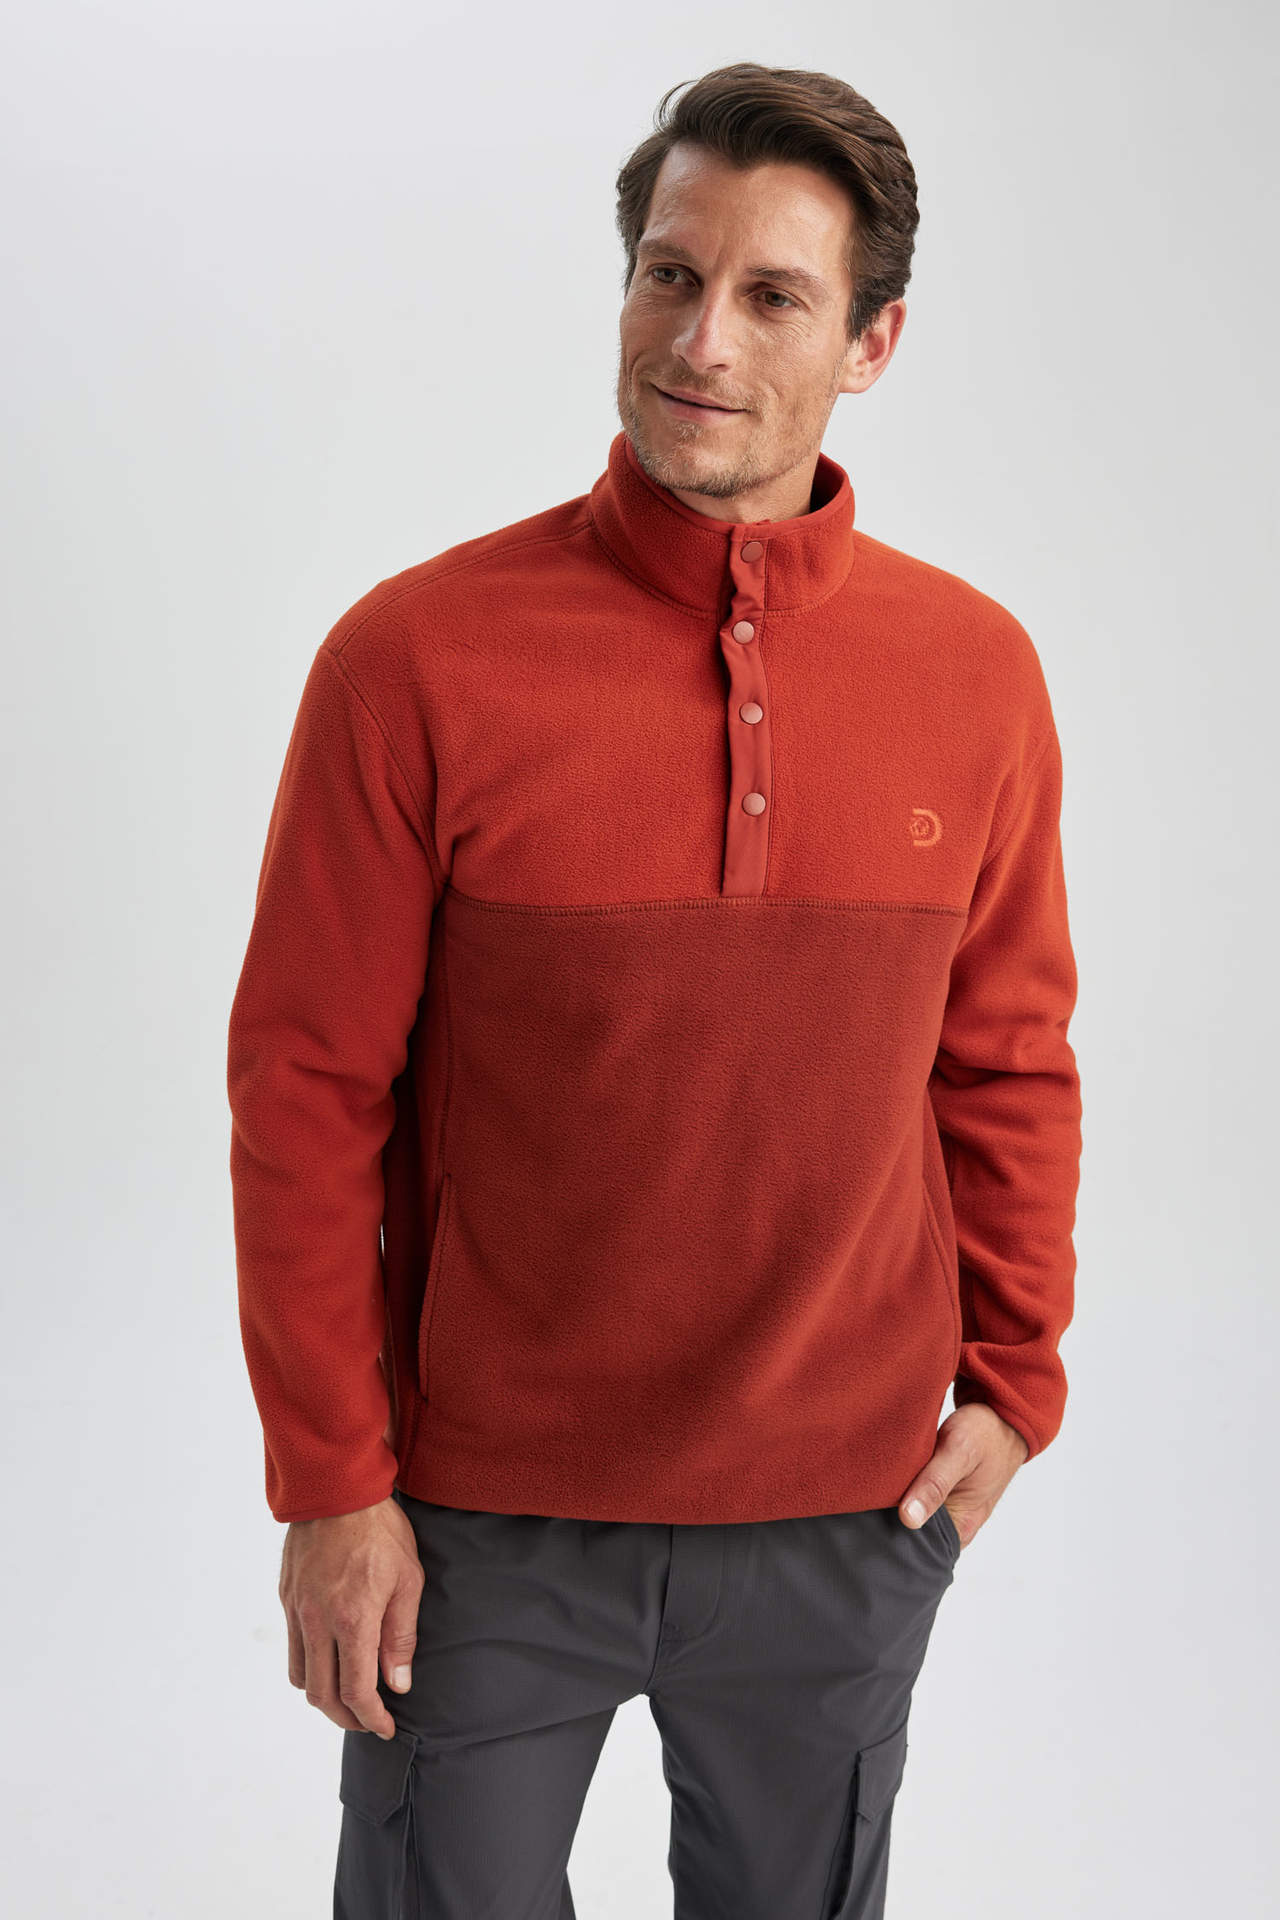 DEFACTO Relax Fit Discovery Licensed Long Sleeve Sweatshirt